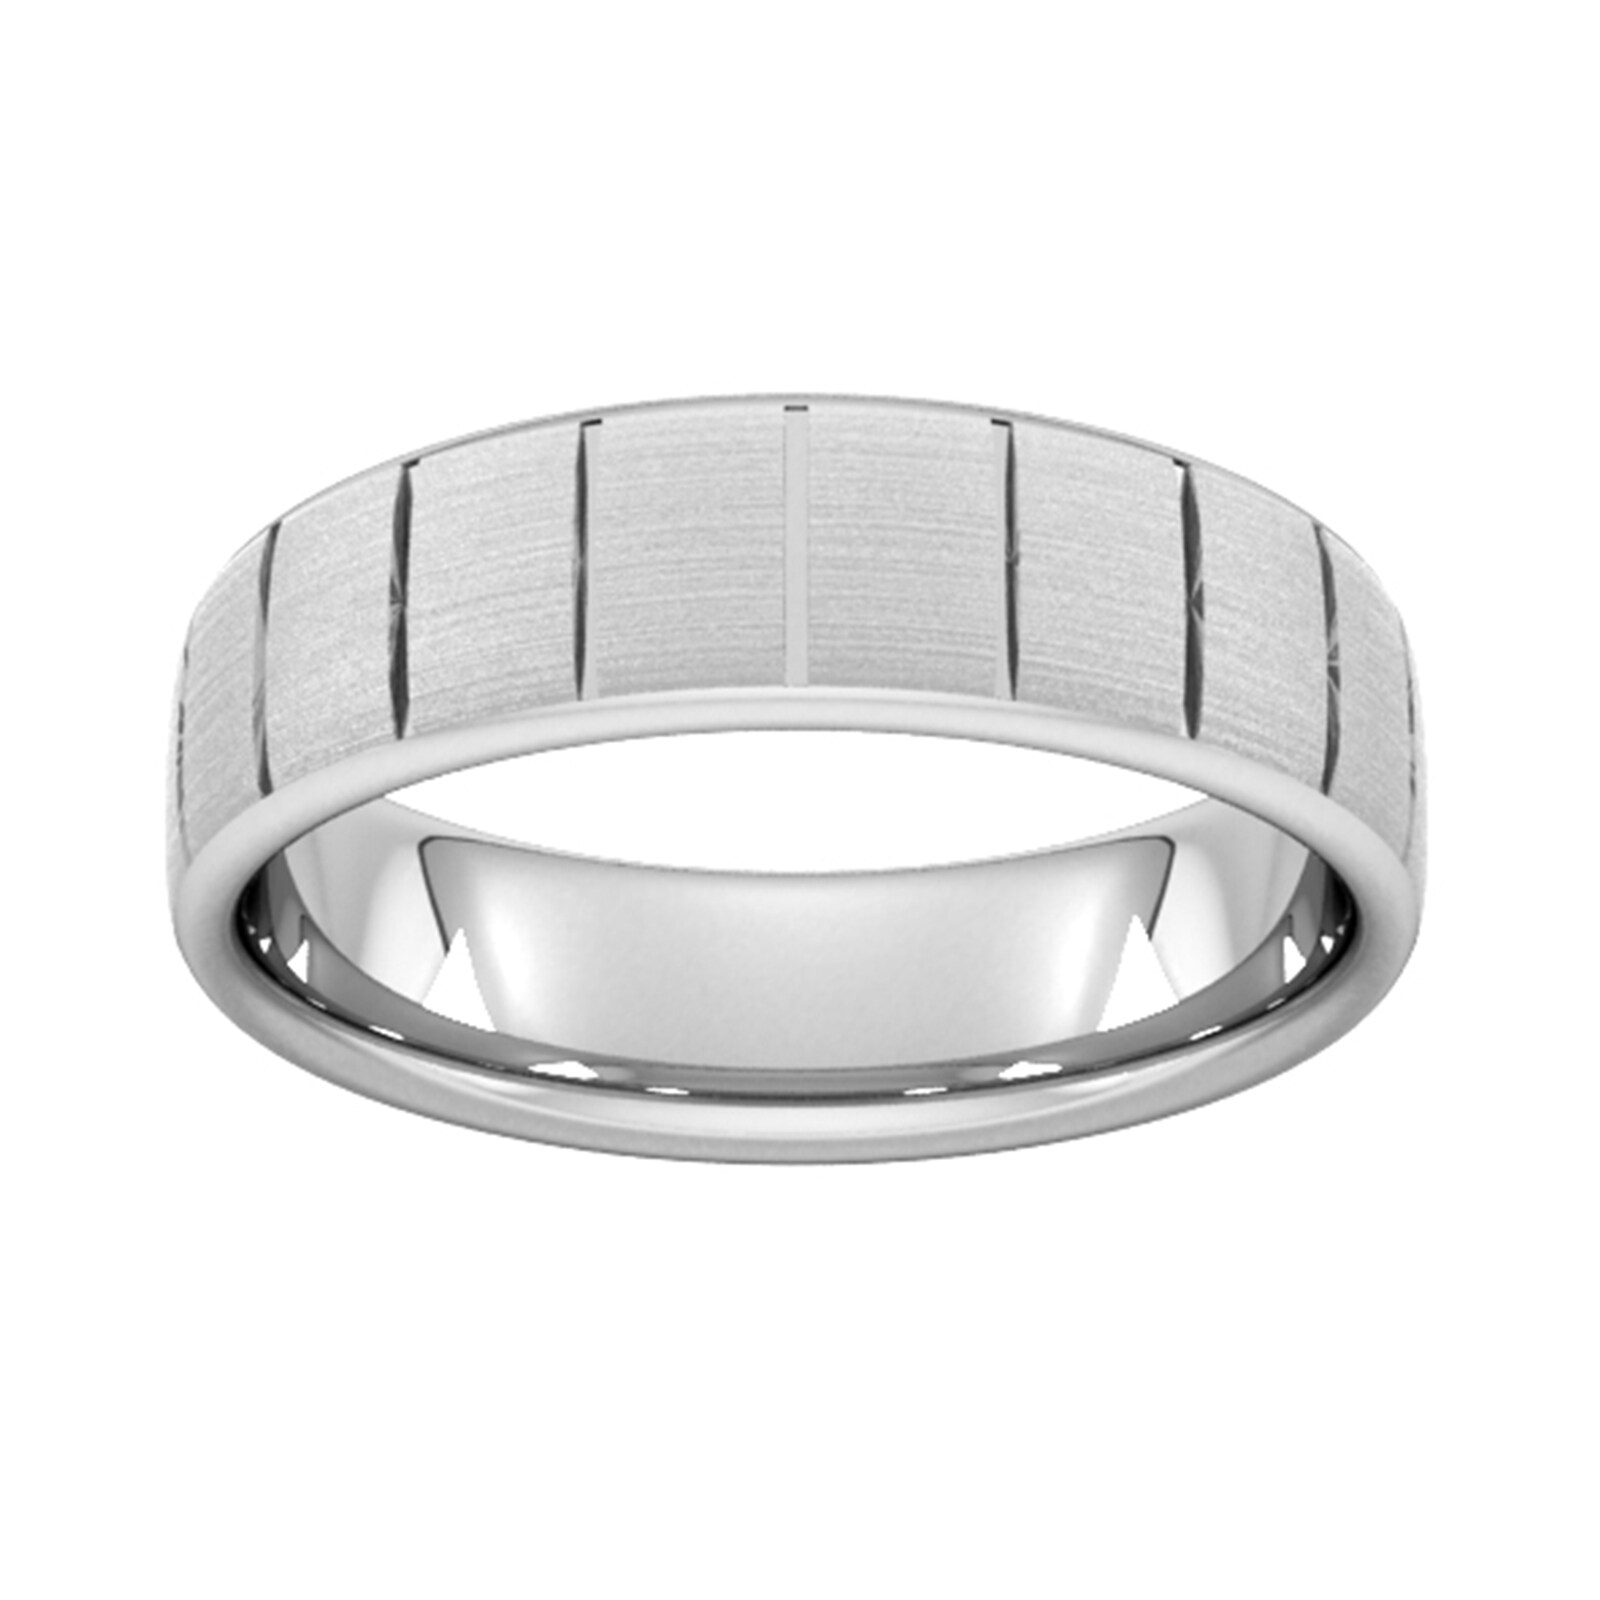 6mm D Shape Heavy Vertical Lines Wedding Ring In 9 Carat White Gold - Ring Size N